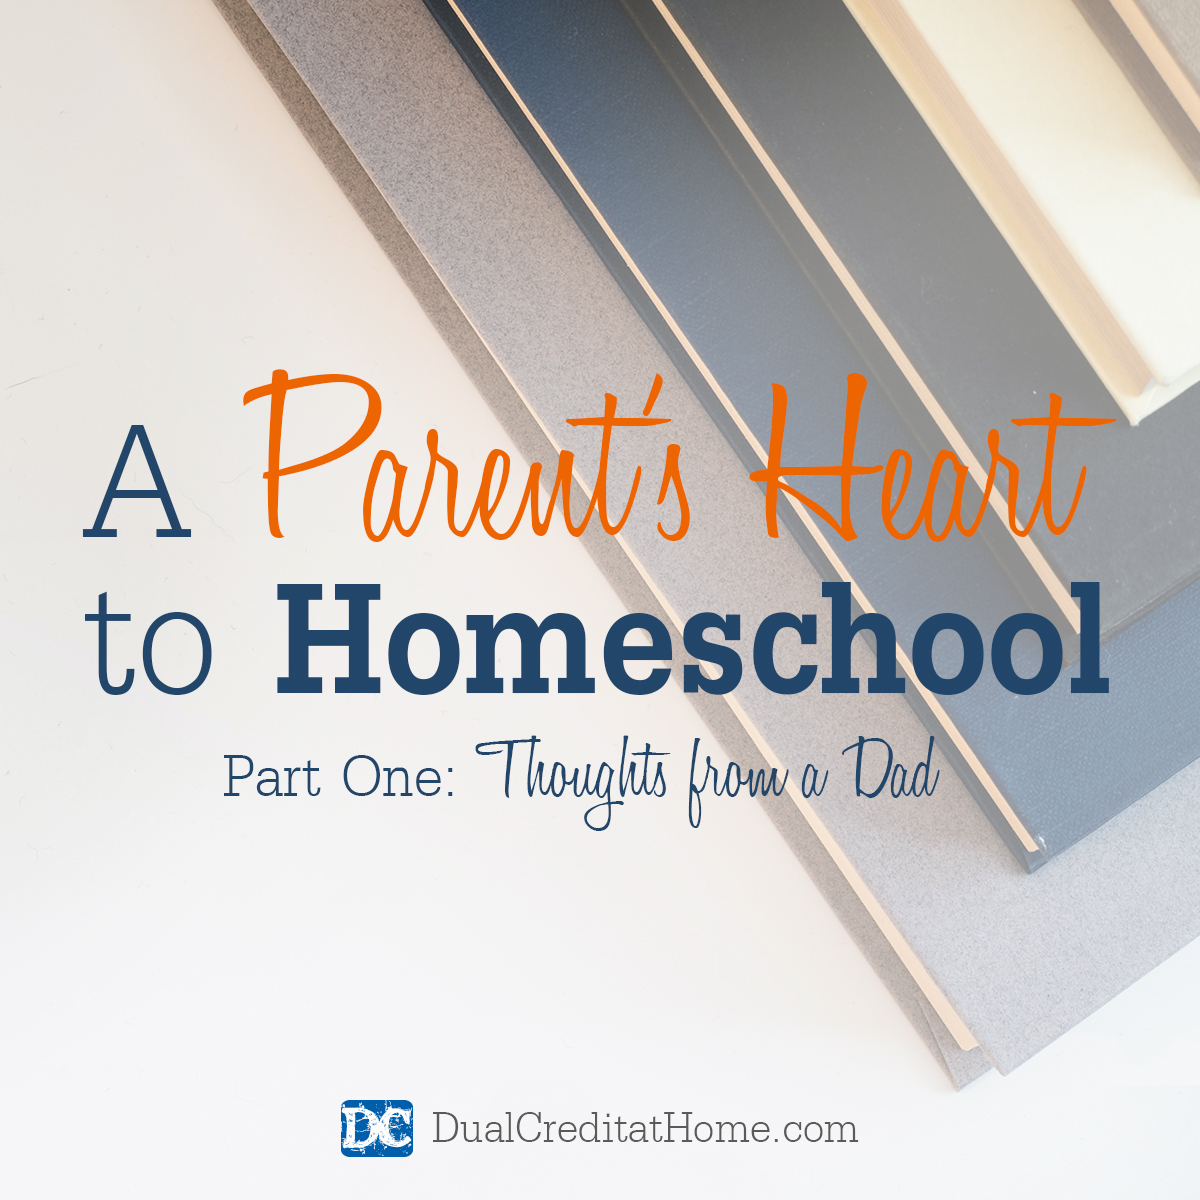 A Parent's Heart to Homeschool: Thoughts from a Dad